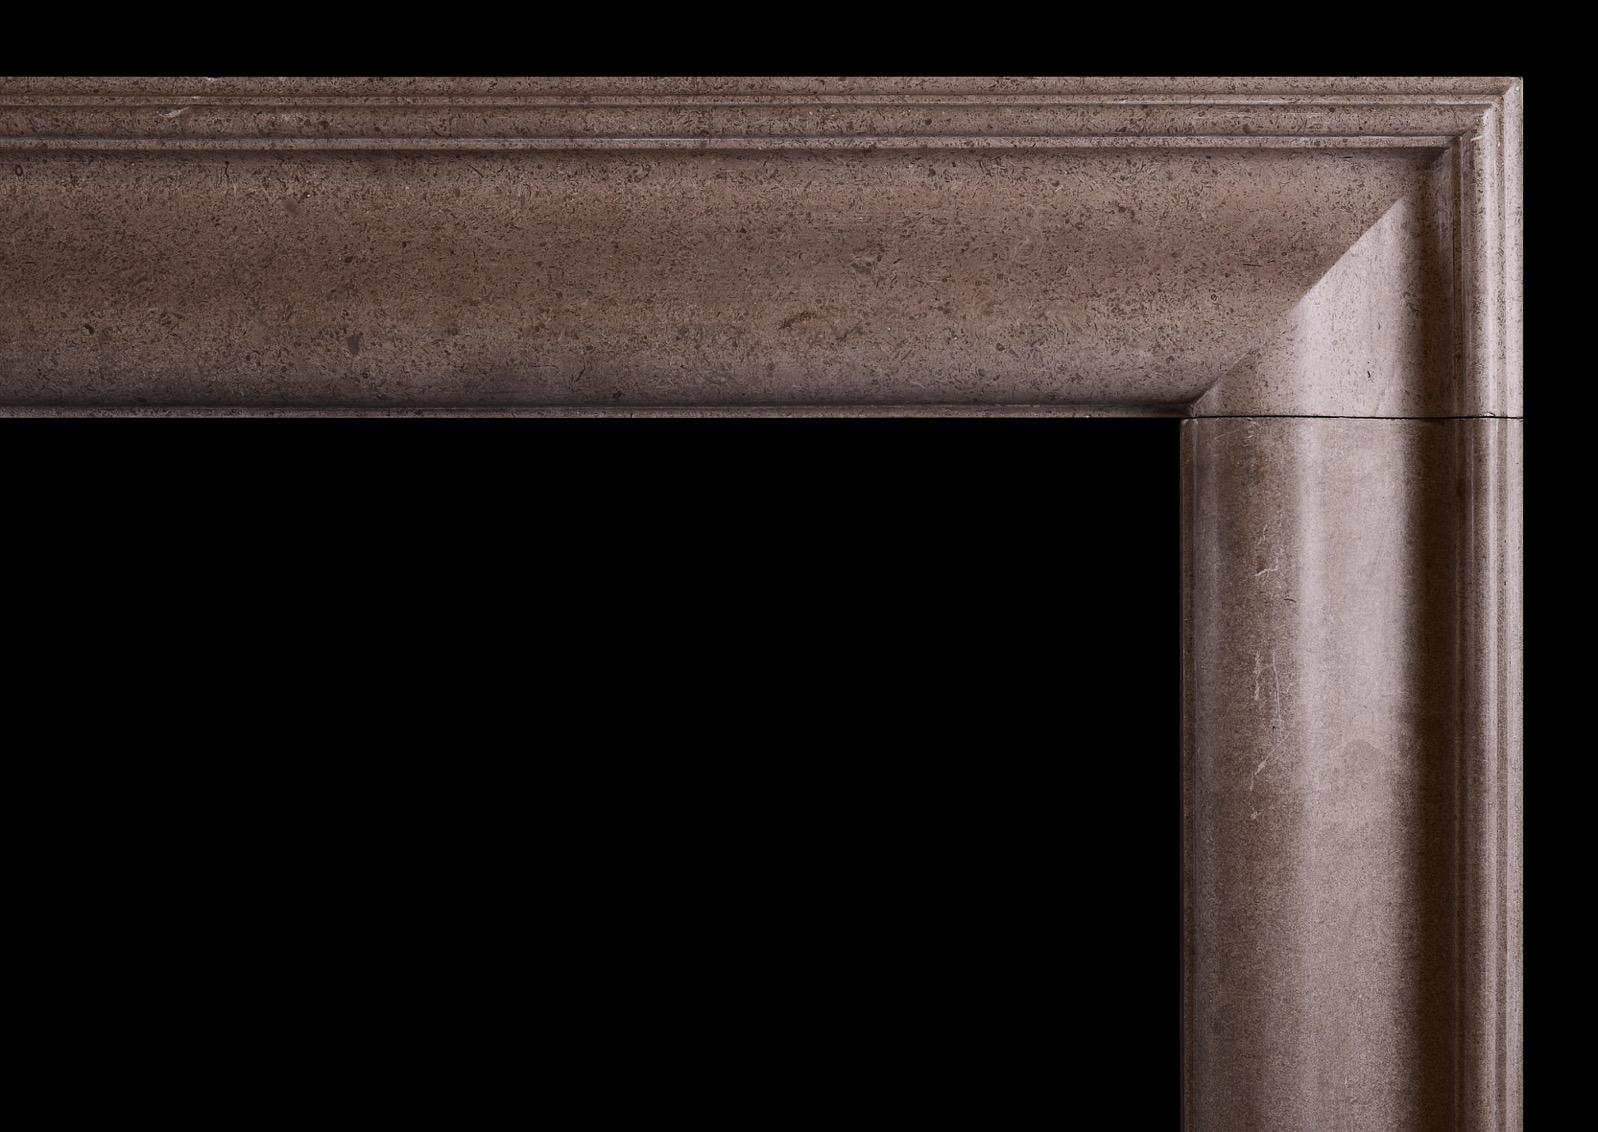 An English Hopton Wood stone bolection fireplace. The moulded frieze and jambs with plain plinth blocks below. A nice satin finish to limestone, 19th century.

Measures: Shelf width 1555 mm 61 ¼